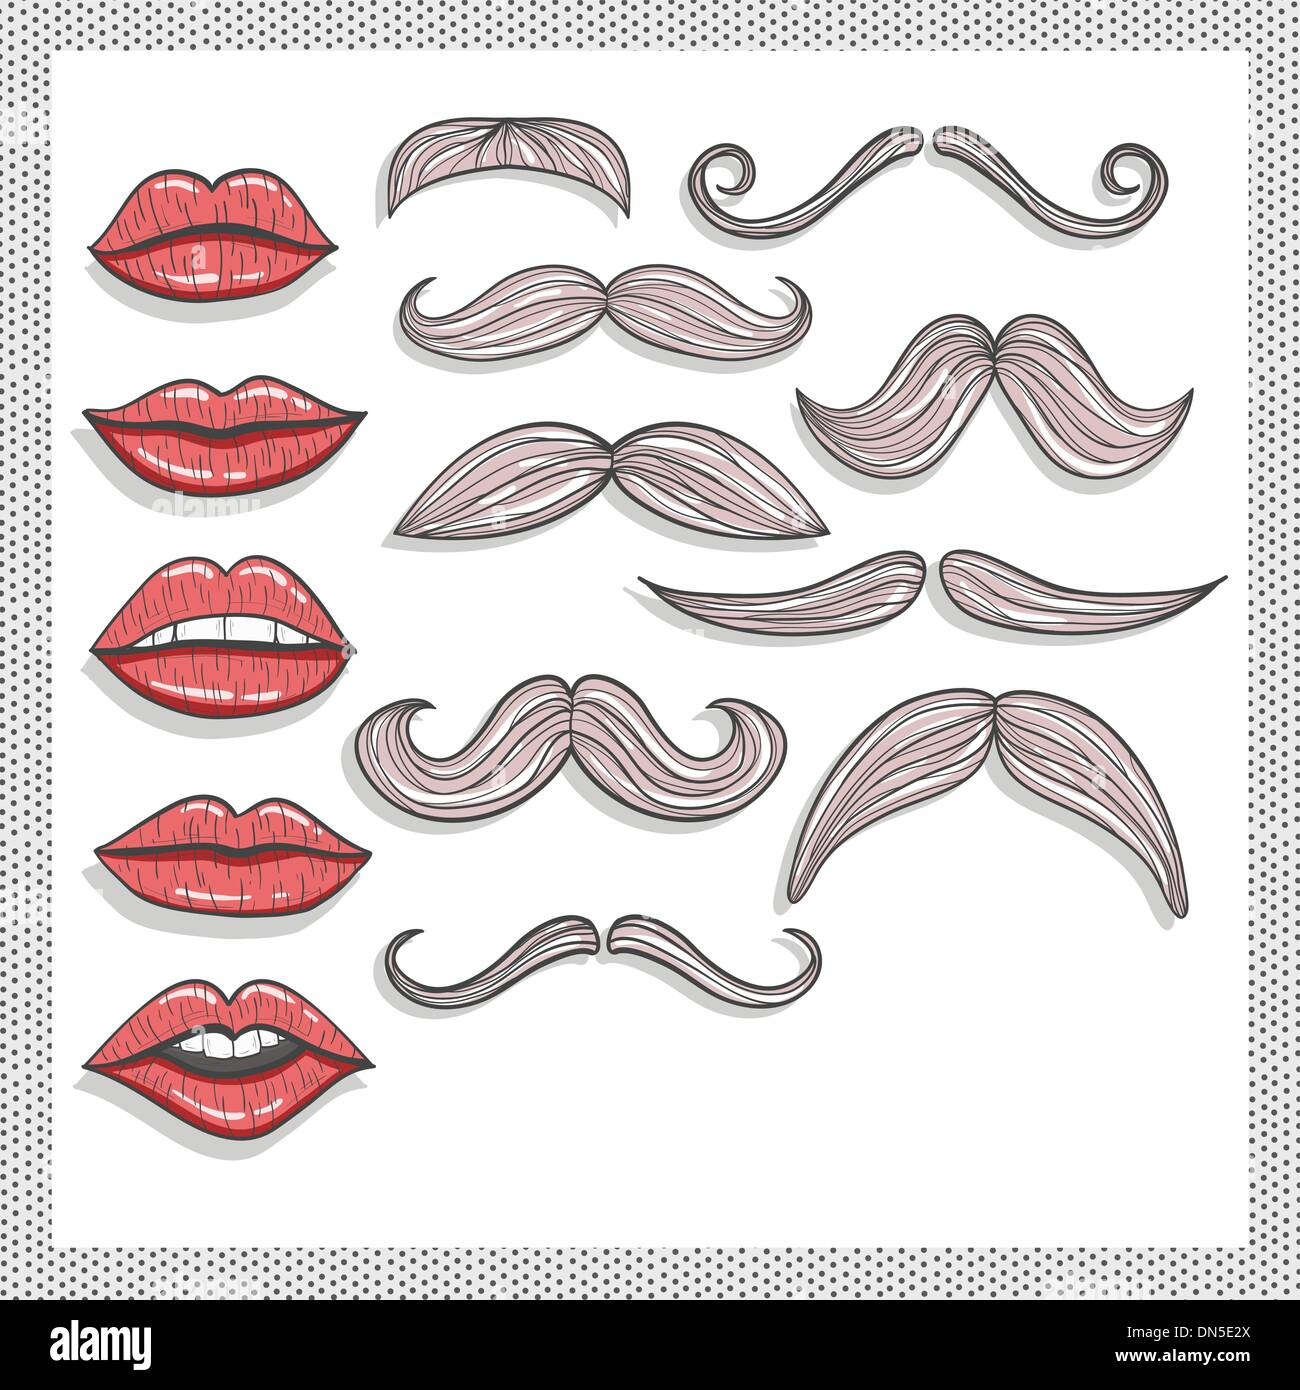 Retro lips and mustaches elements set Stock Vector